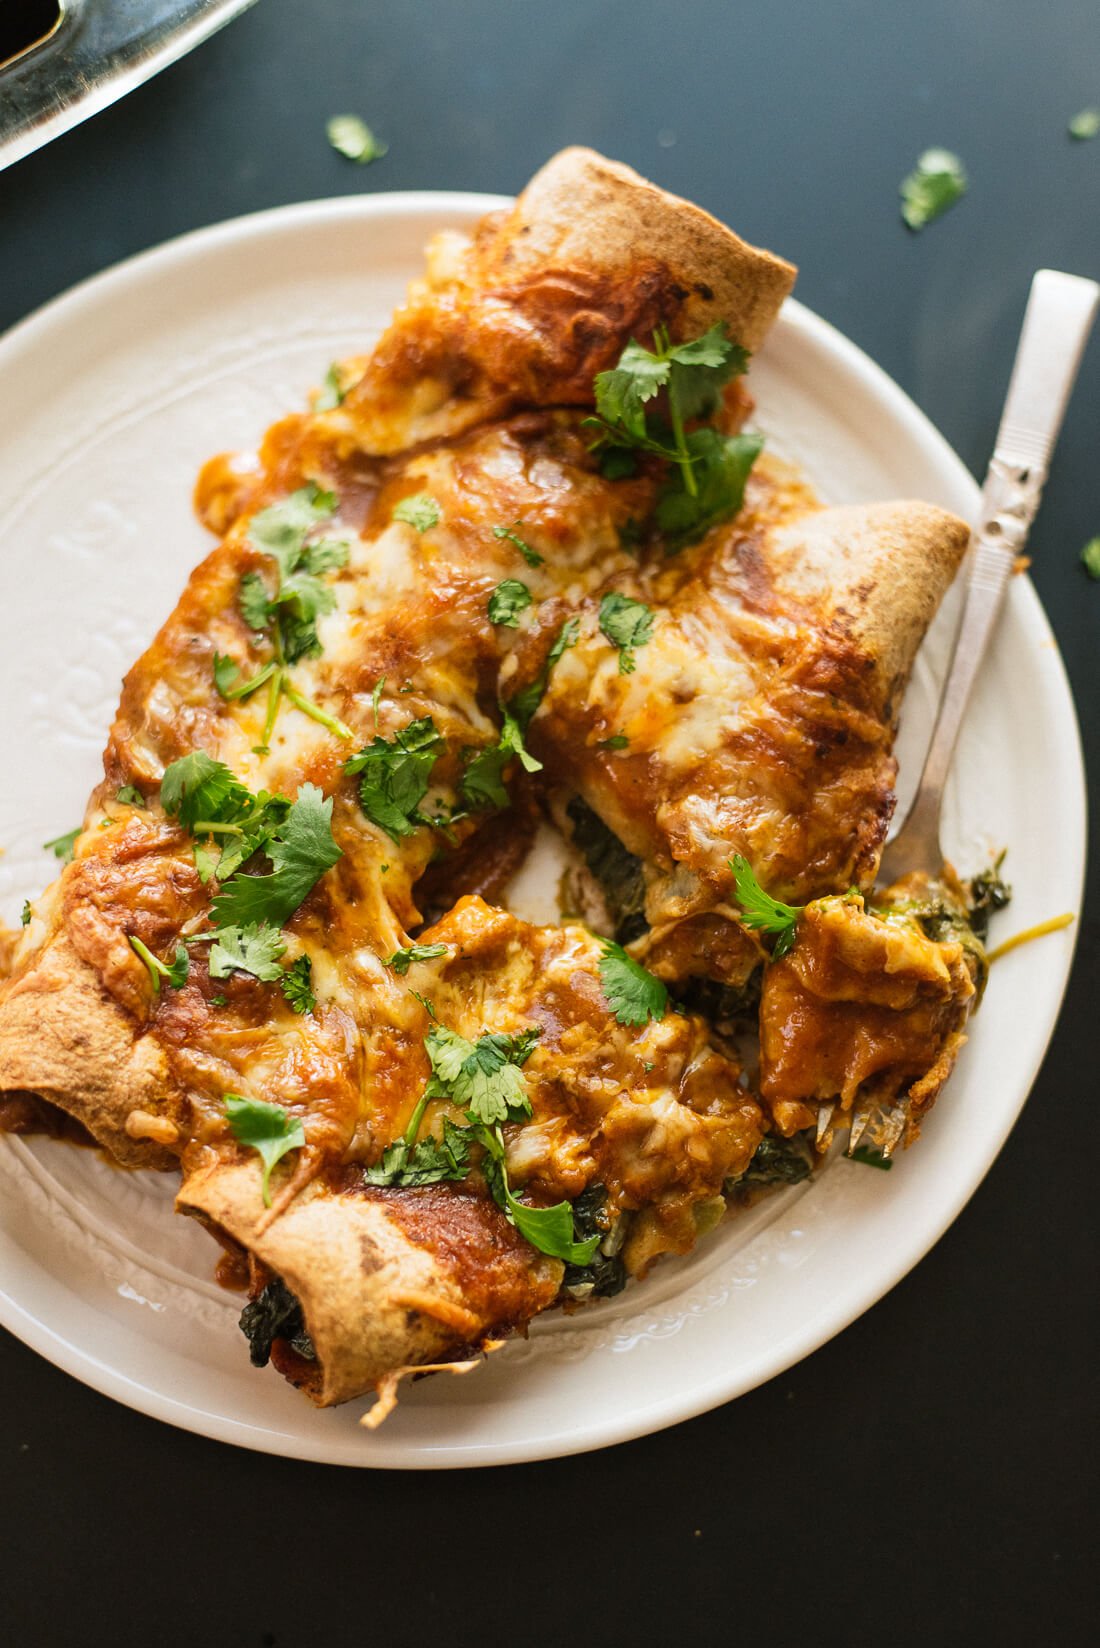 spinach artichoke enchiladas with a simple homemade red sauce